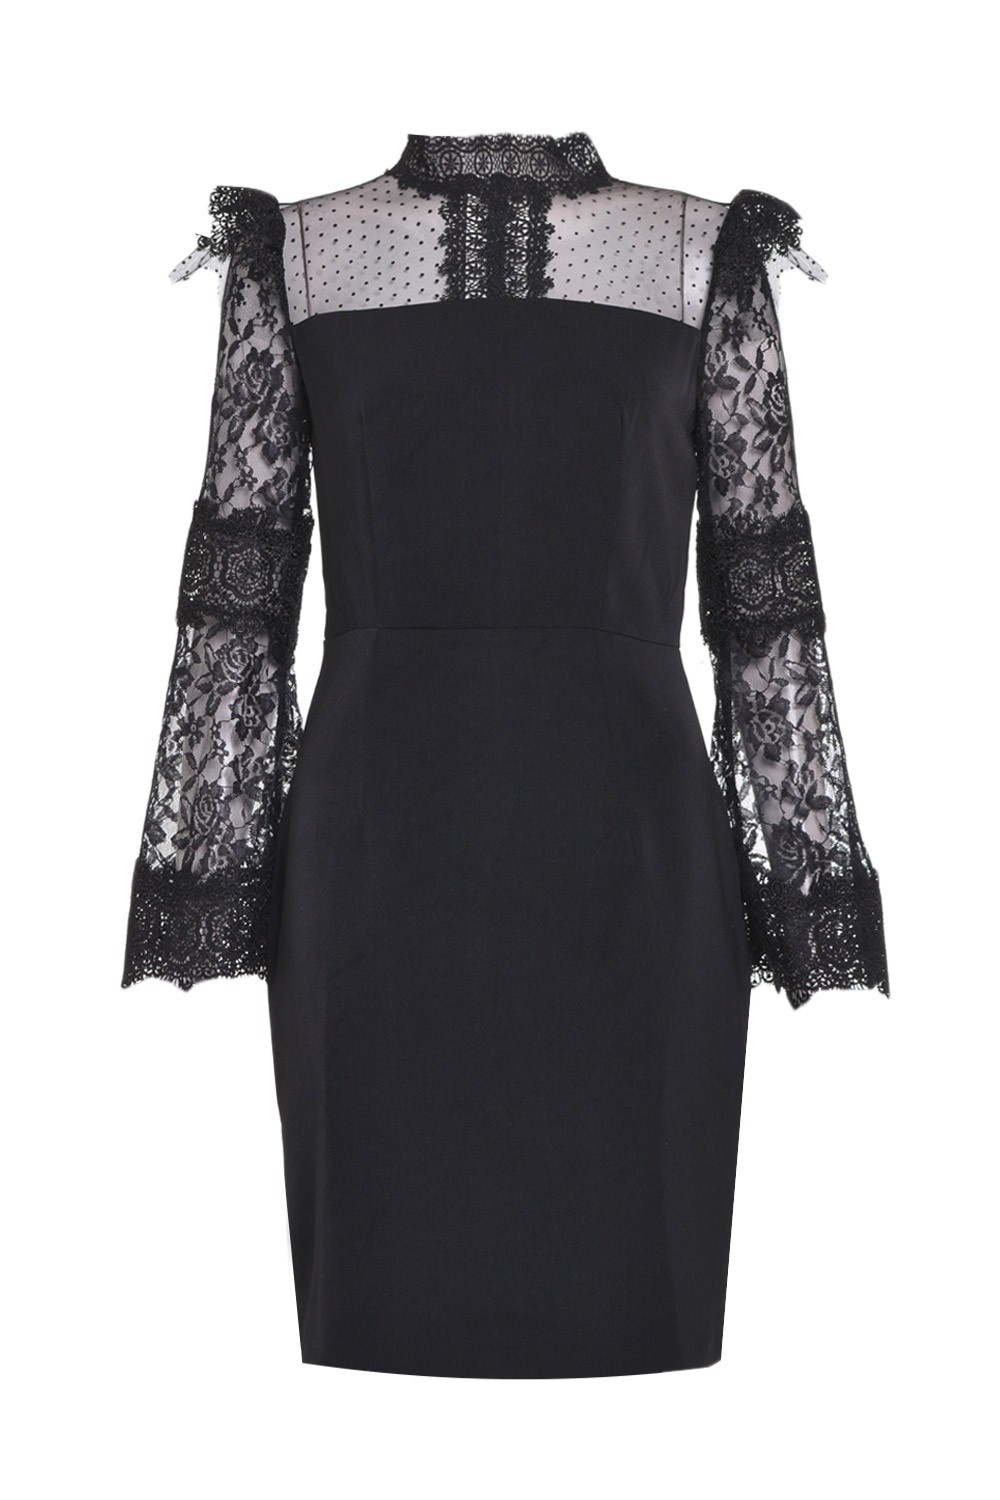 Stella Myla L/S Lace Contrast Dress in Black | iCLOTHING